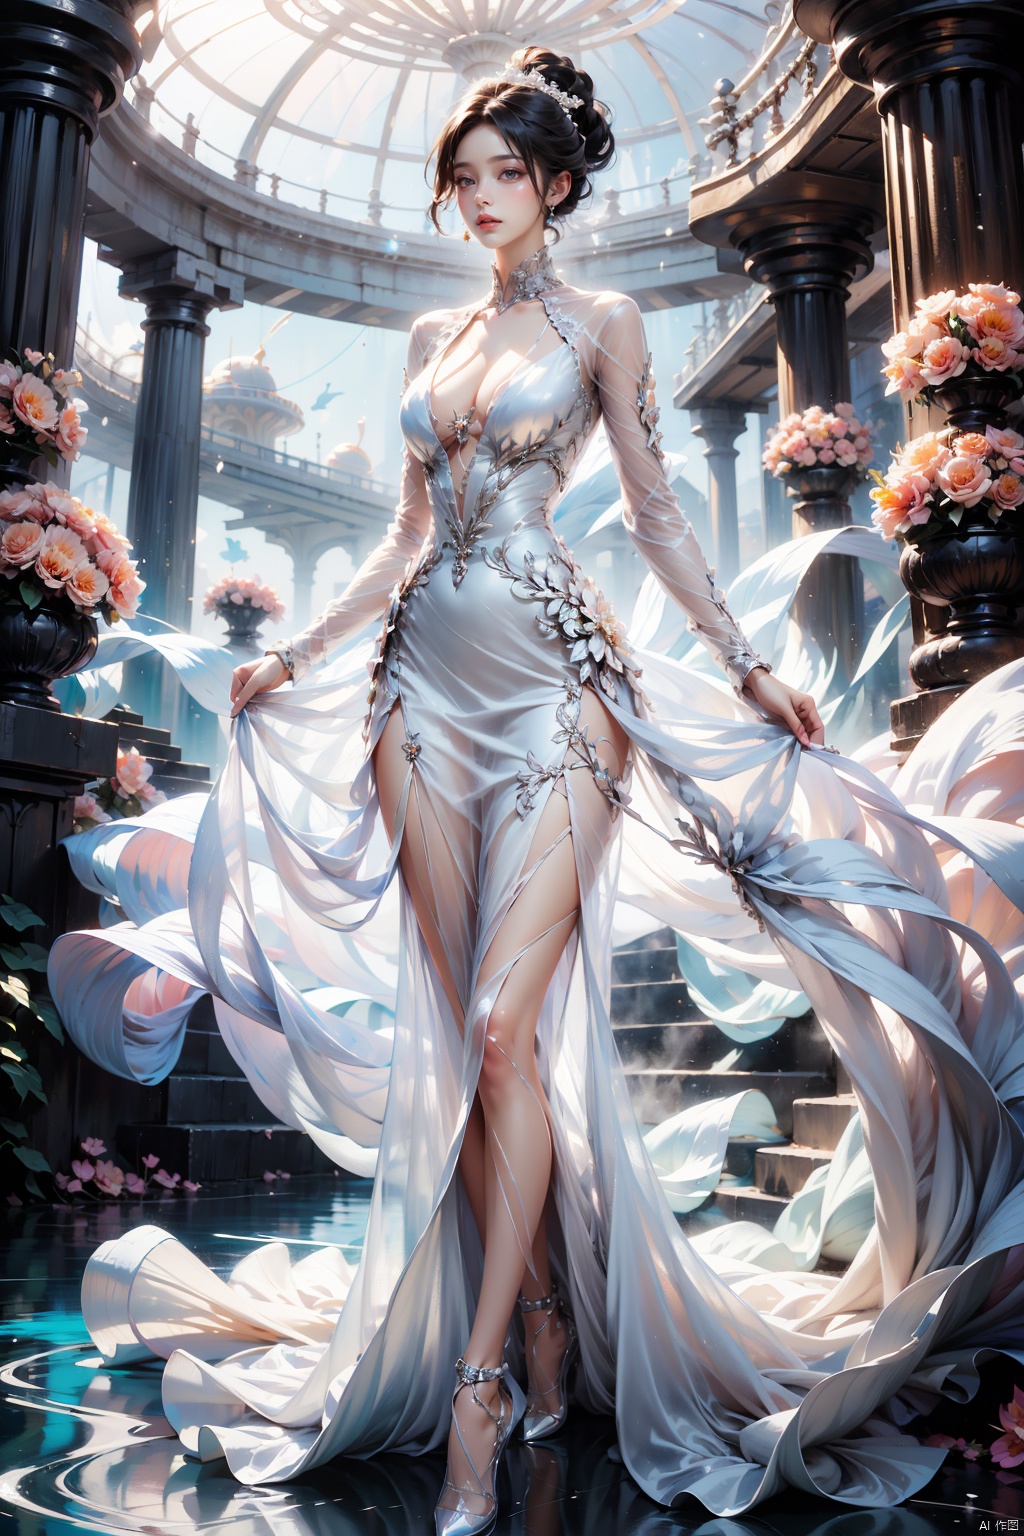  High quality, masterpiece, wallpaper, 1 beautiful woman surrounded by a water ring, flowing hair, dress, (semi transparent white mesh dress: 1.3), high ponytail hair, walking, huge flowers, fantasy, blue, sparkling dress, soft light

